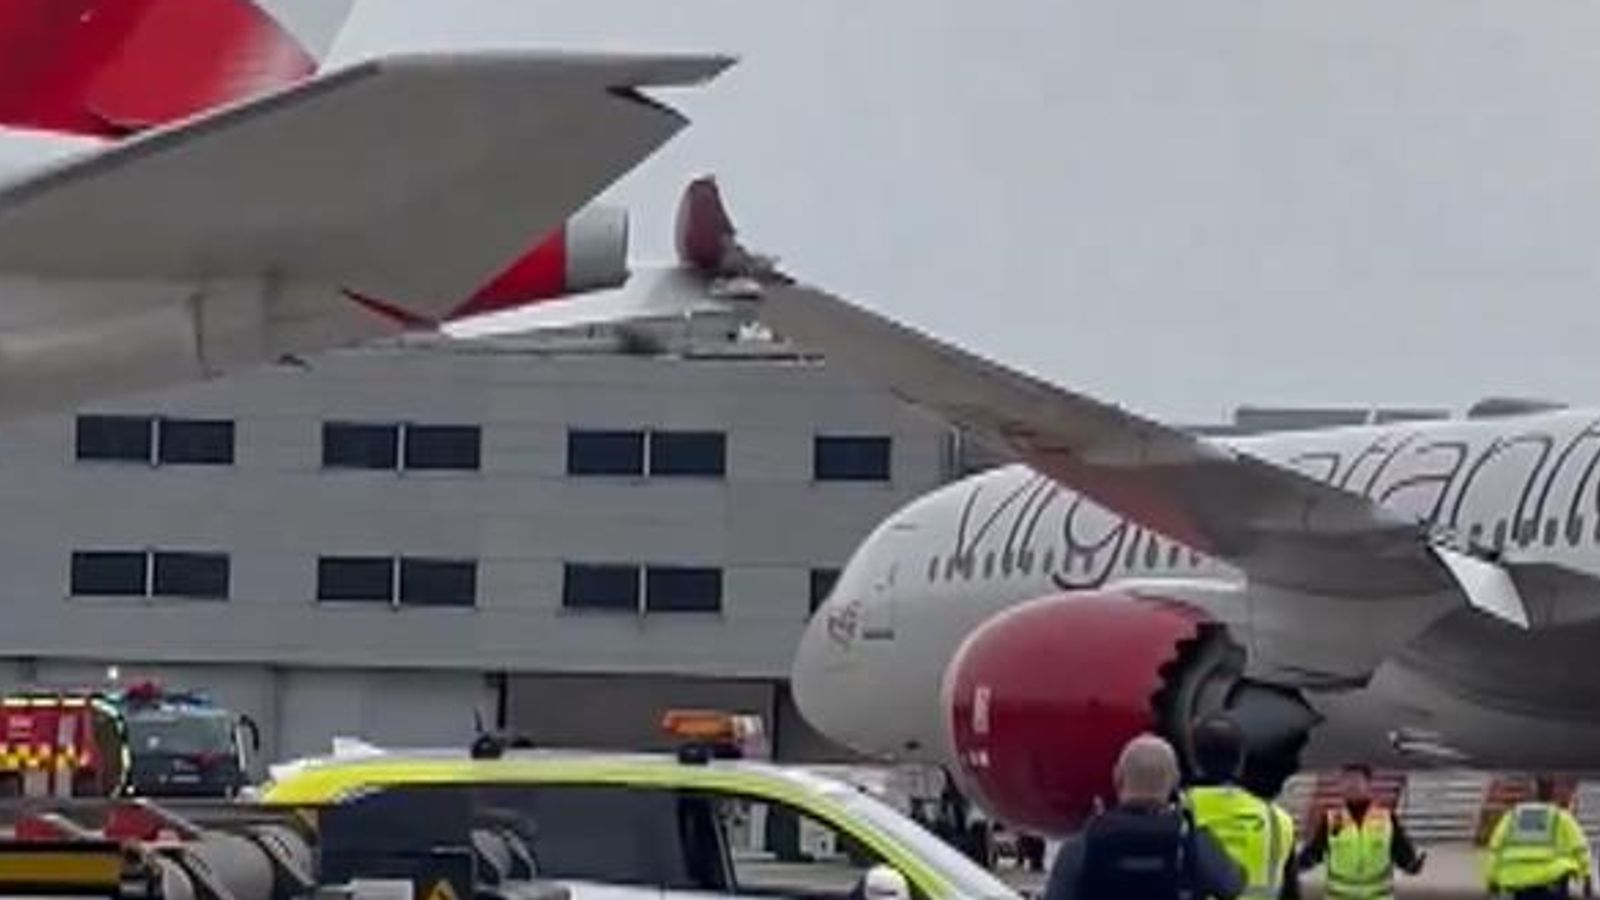 Two planes at Heathrow Airport collide wings